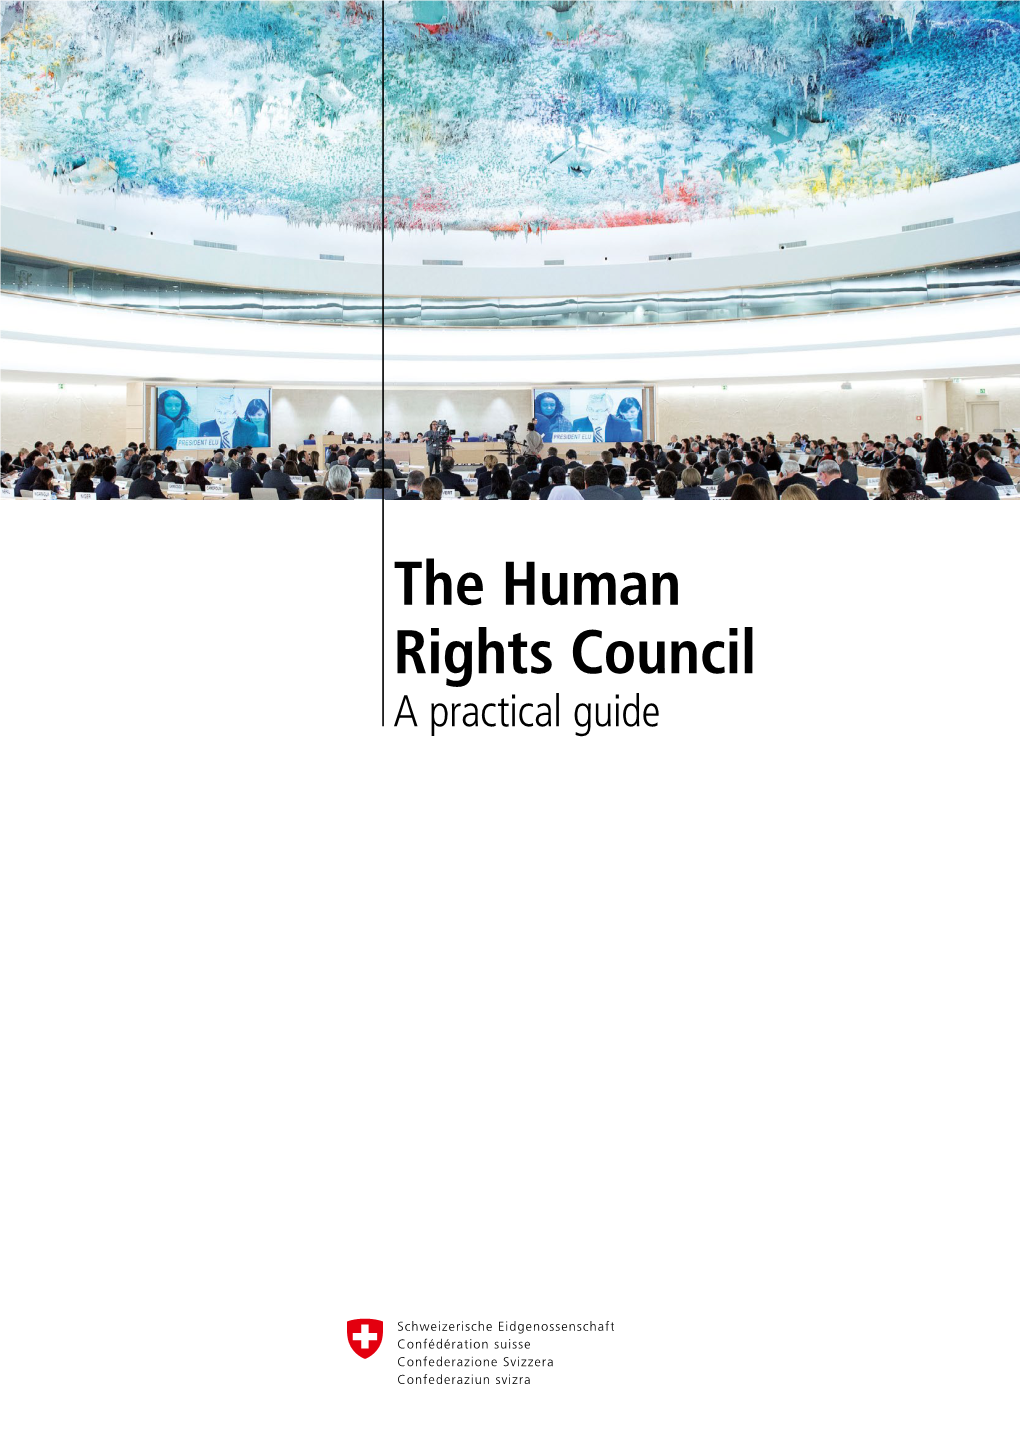 The Human Rights Council: a Practical Guide